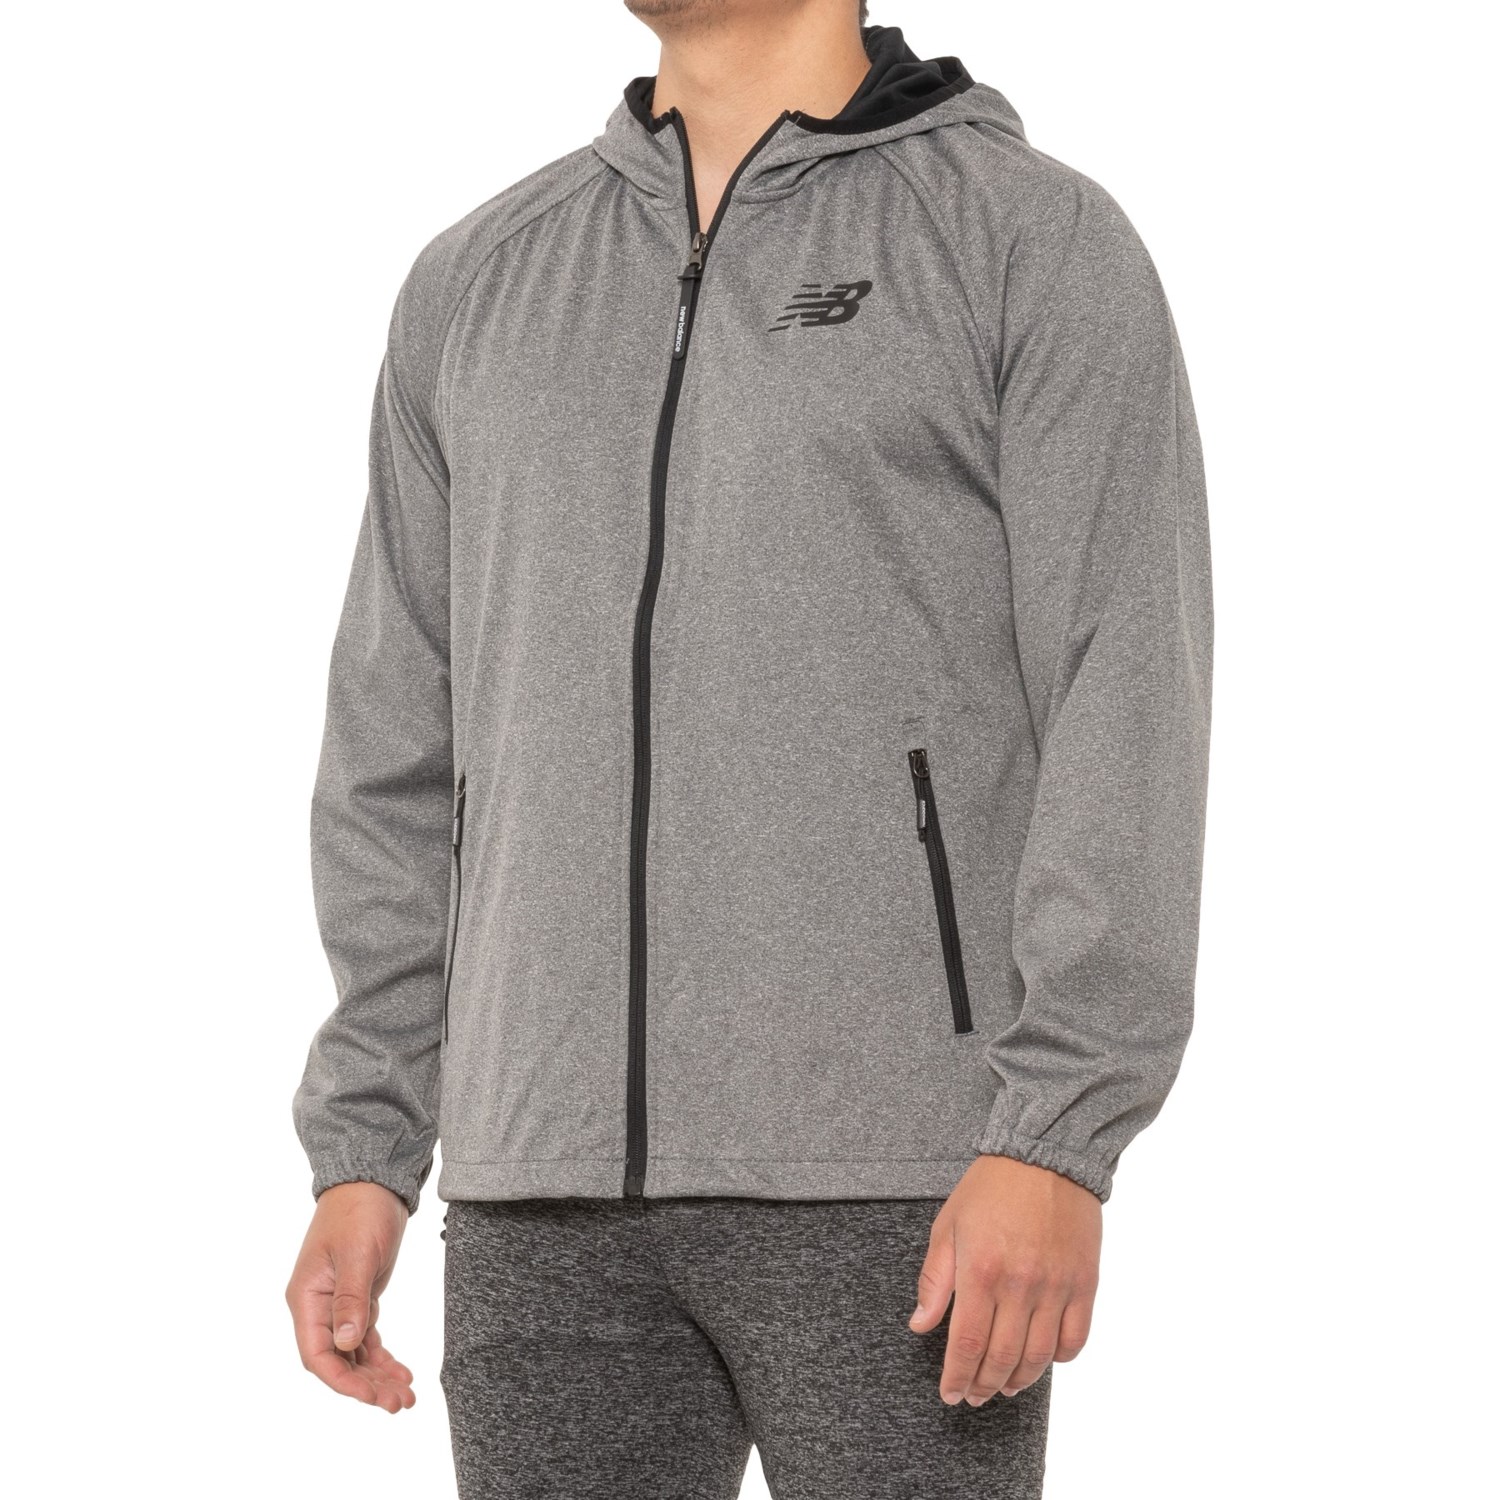 New Balance All-Motion Peached Jacket (For Men)